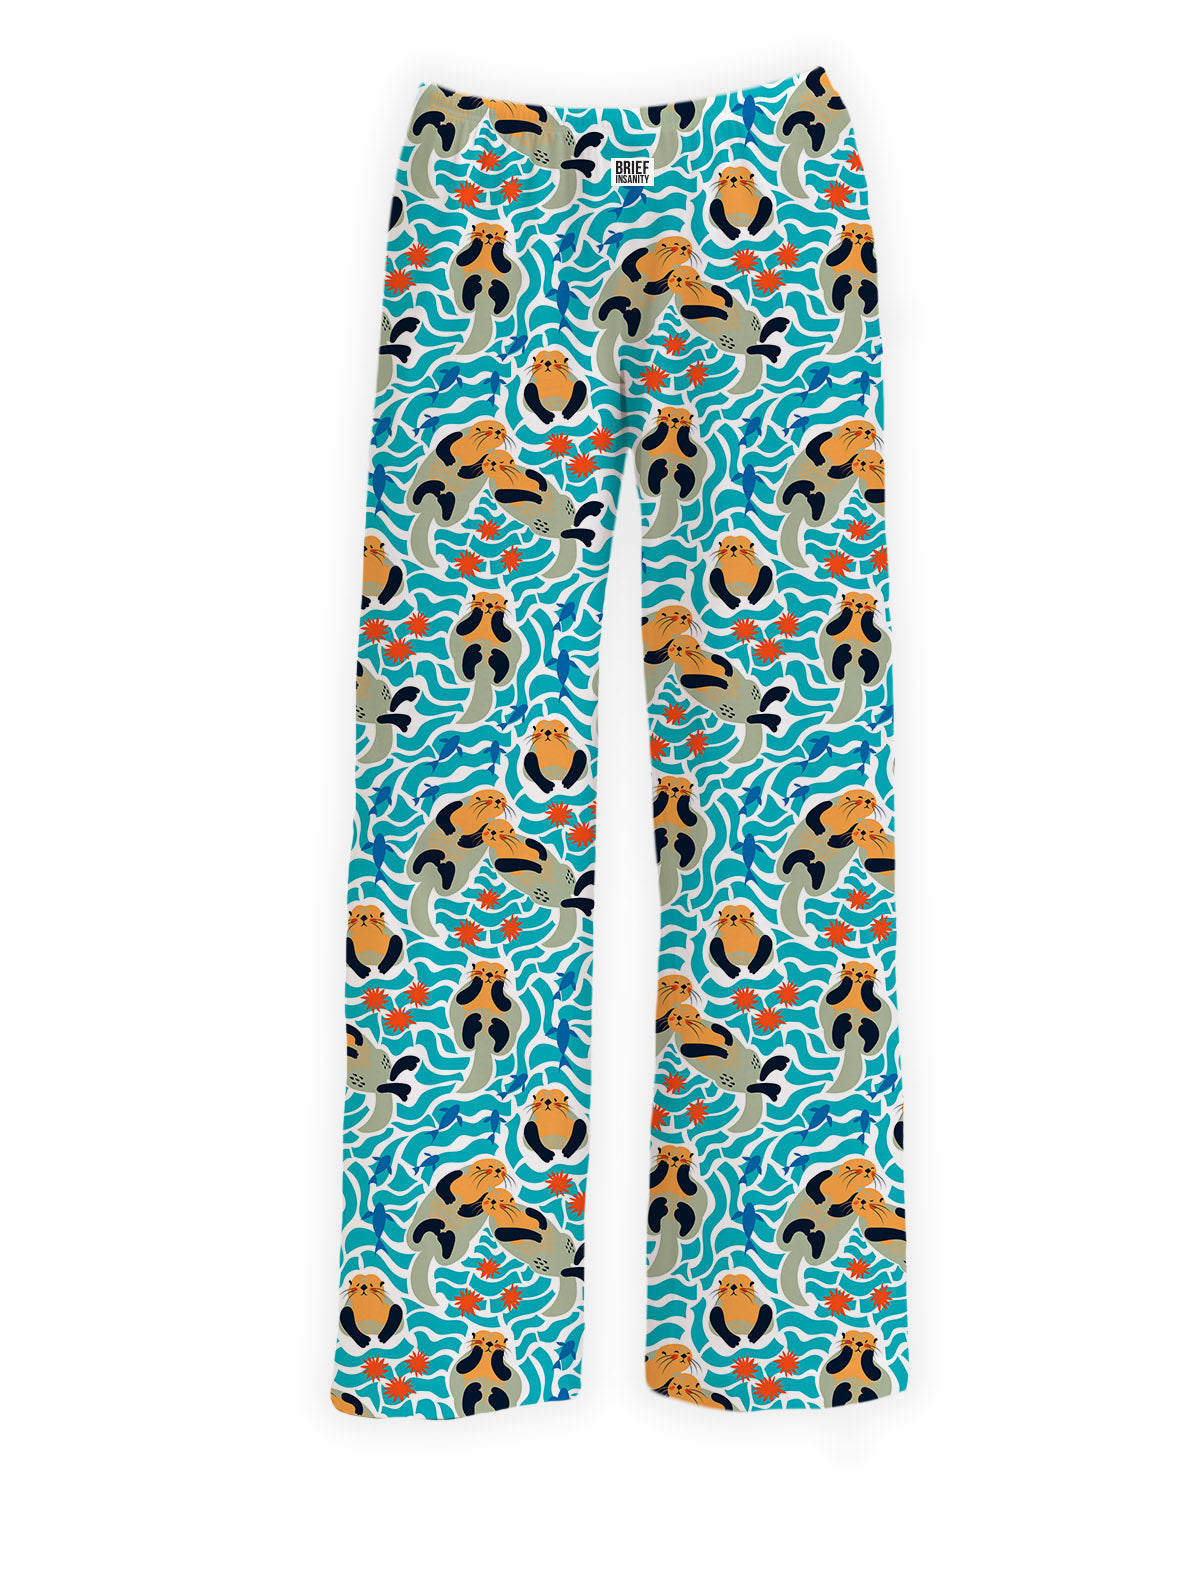 BRIEF INSANITY Sea Otter Lounge Pants